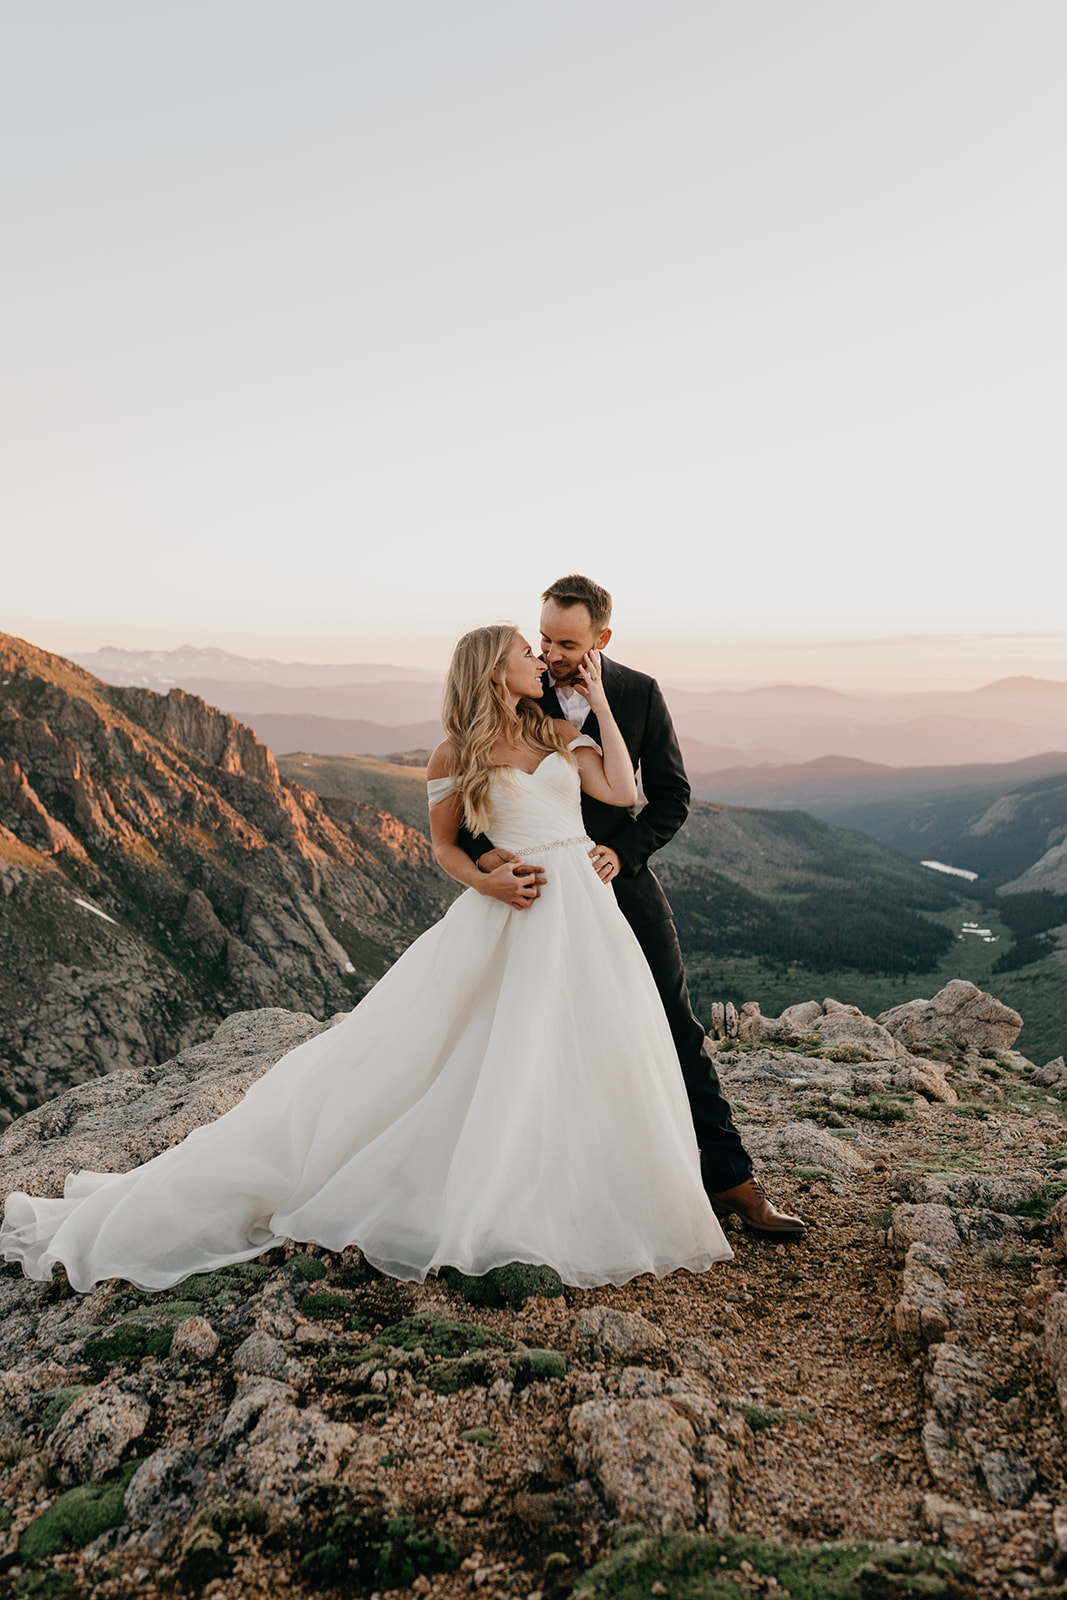 Couple kissing during sunset during their rocky mountain wedding